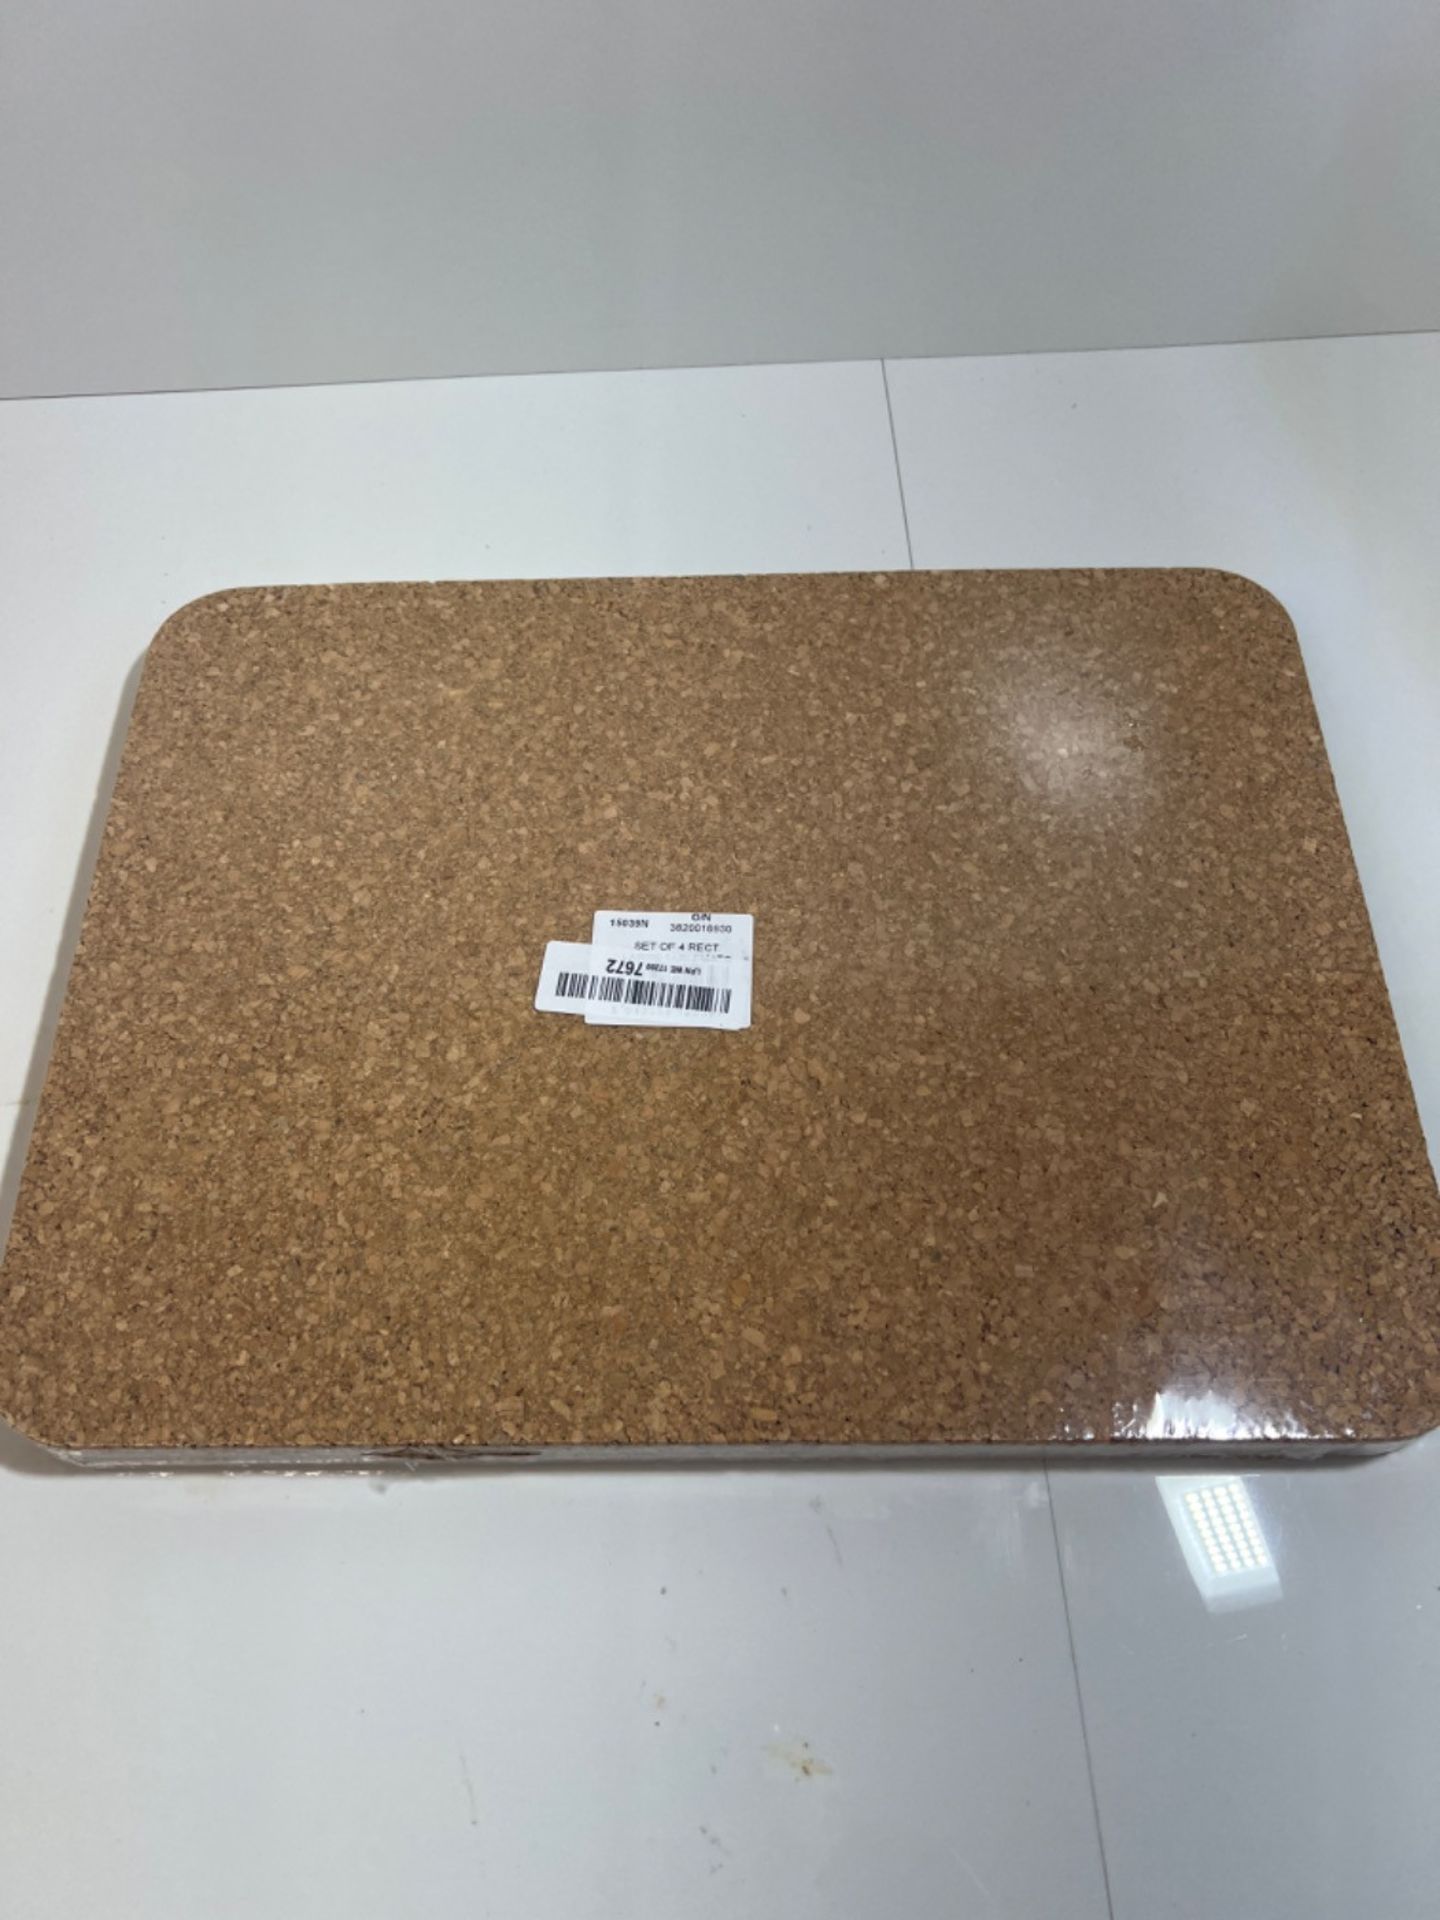 T&G 15039 FSC Certified Cork Rectangular Table Mats/Surface Protectors, Set of 4, Large, 40 x 30 x  - Image 2 of 2